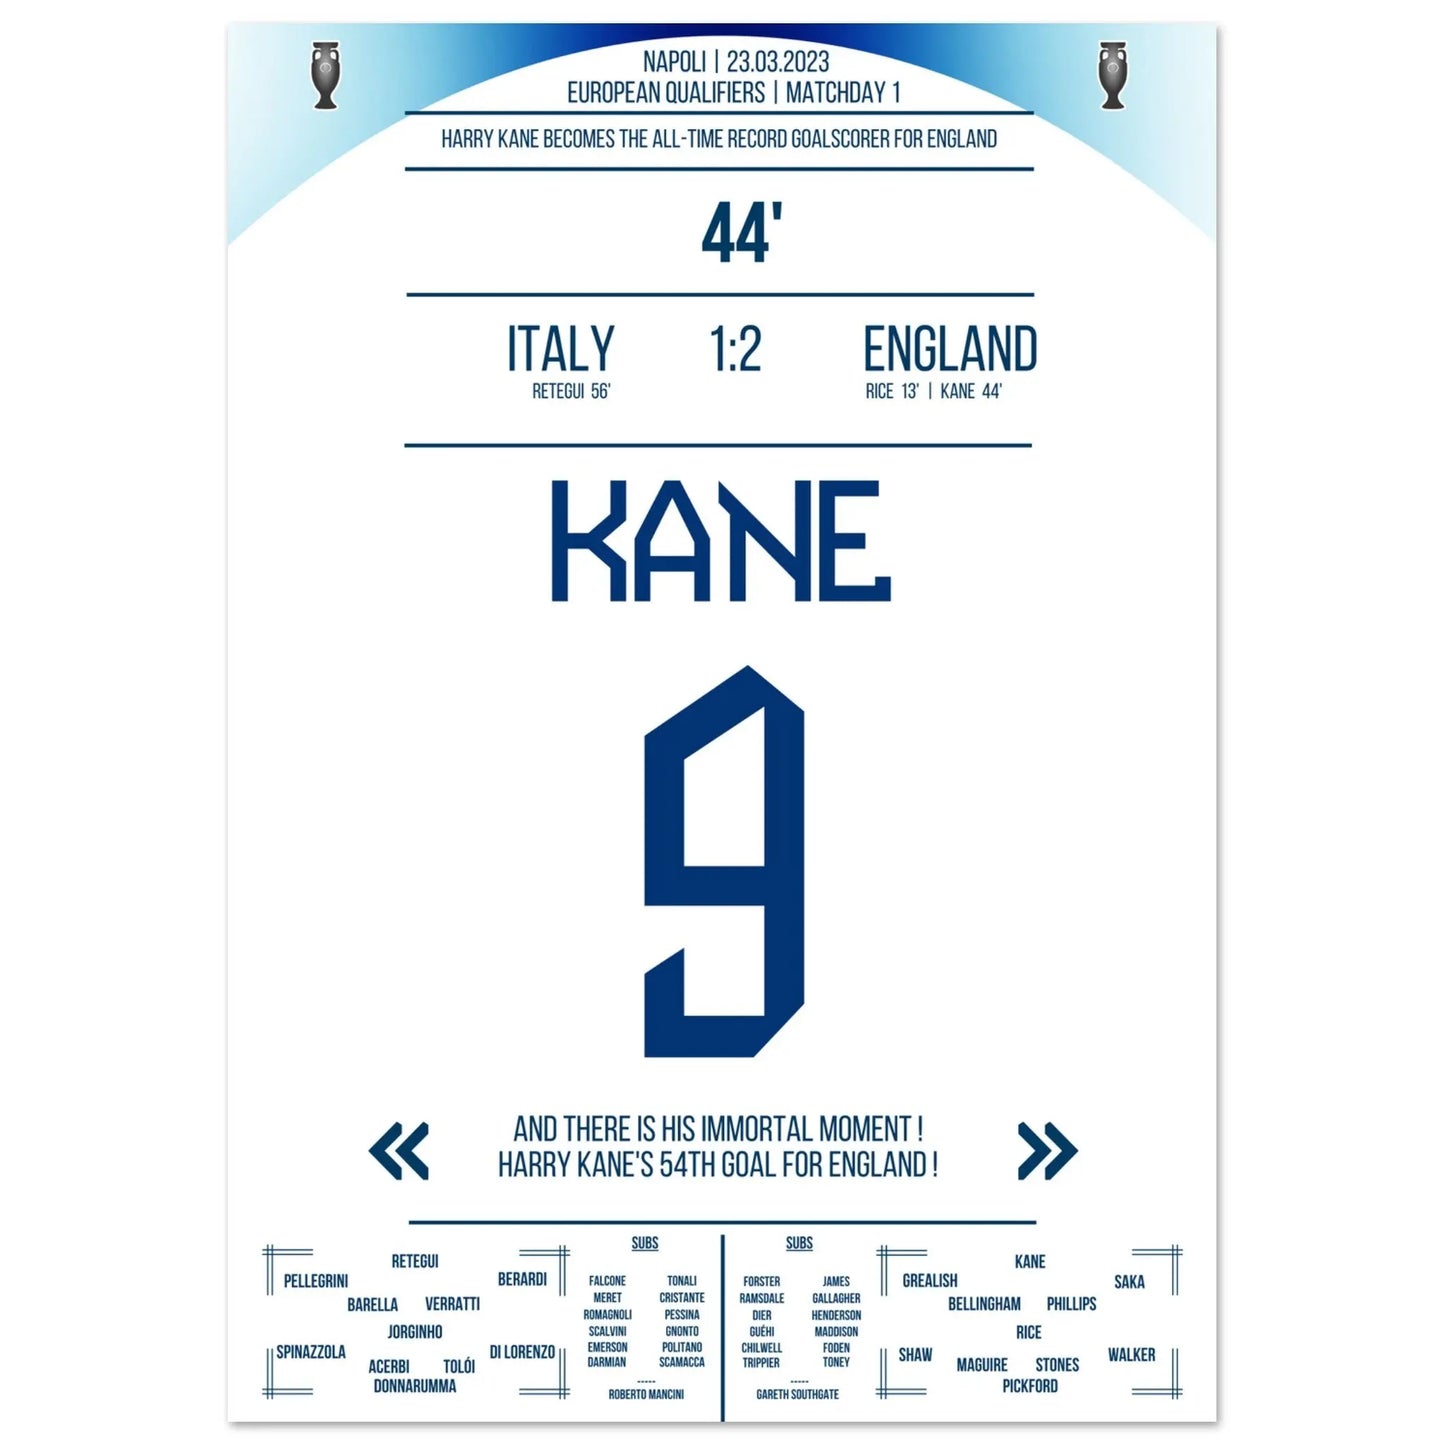 Harry Kane's record goal for England